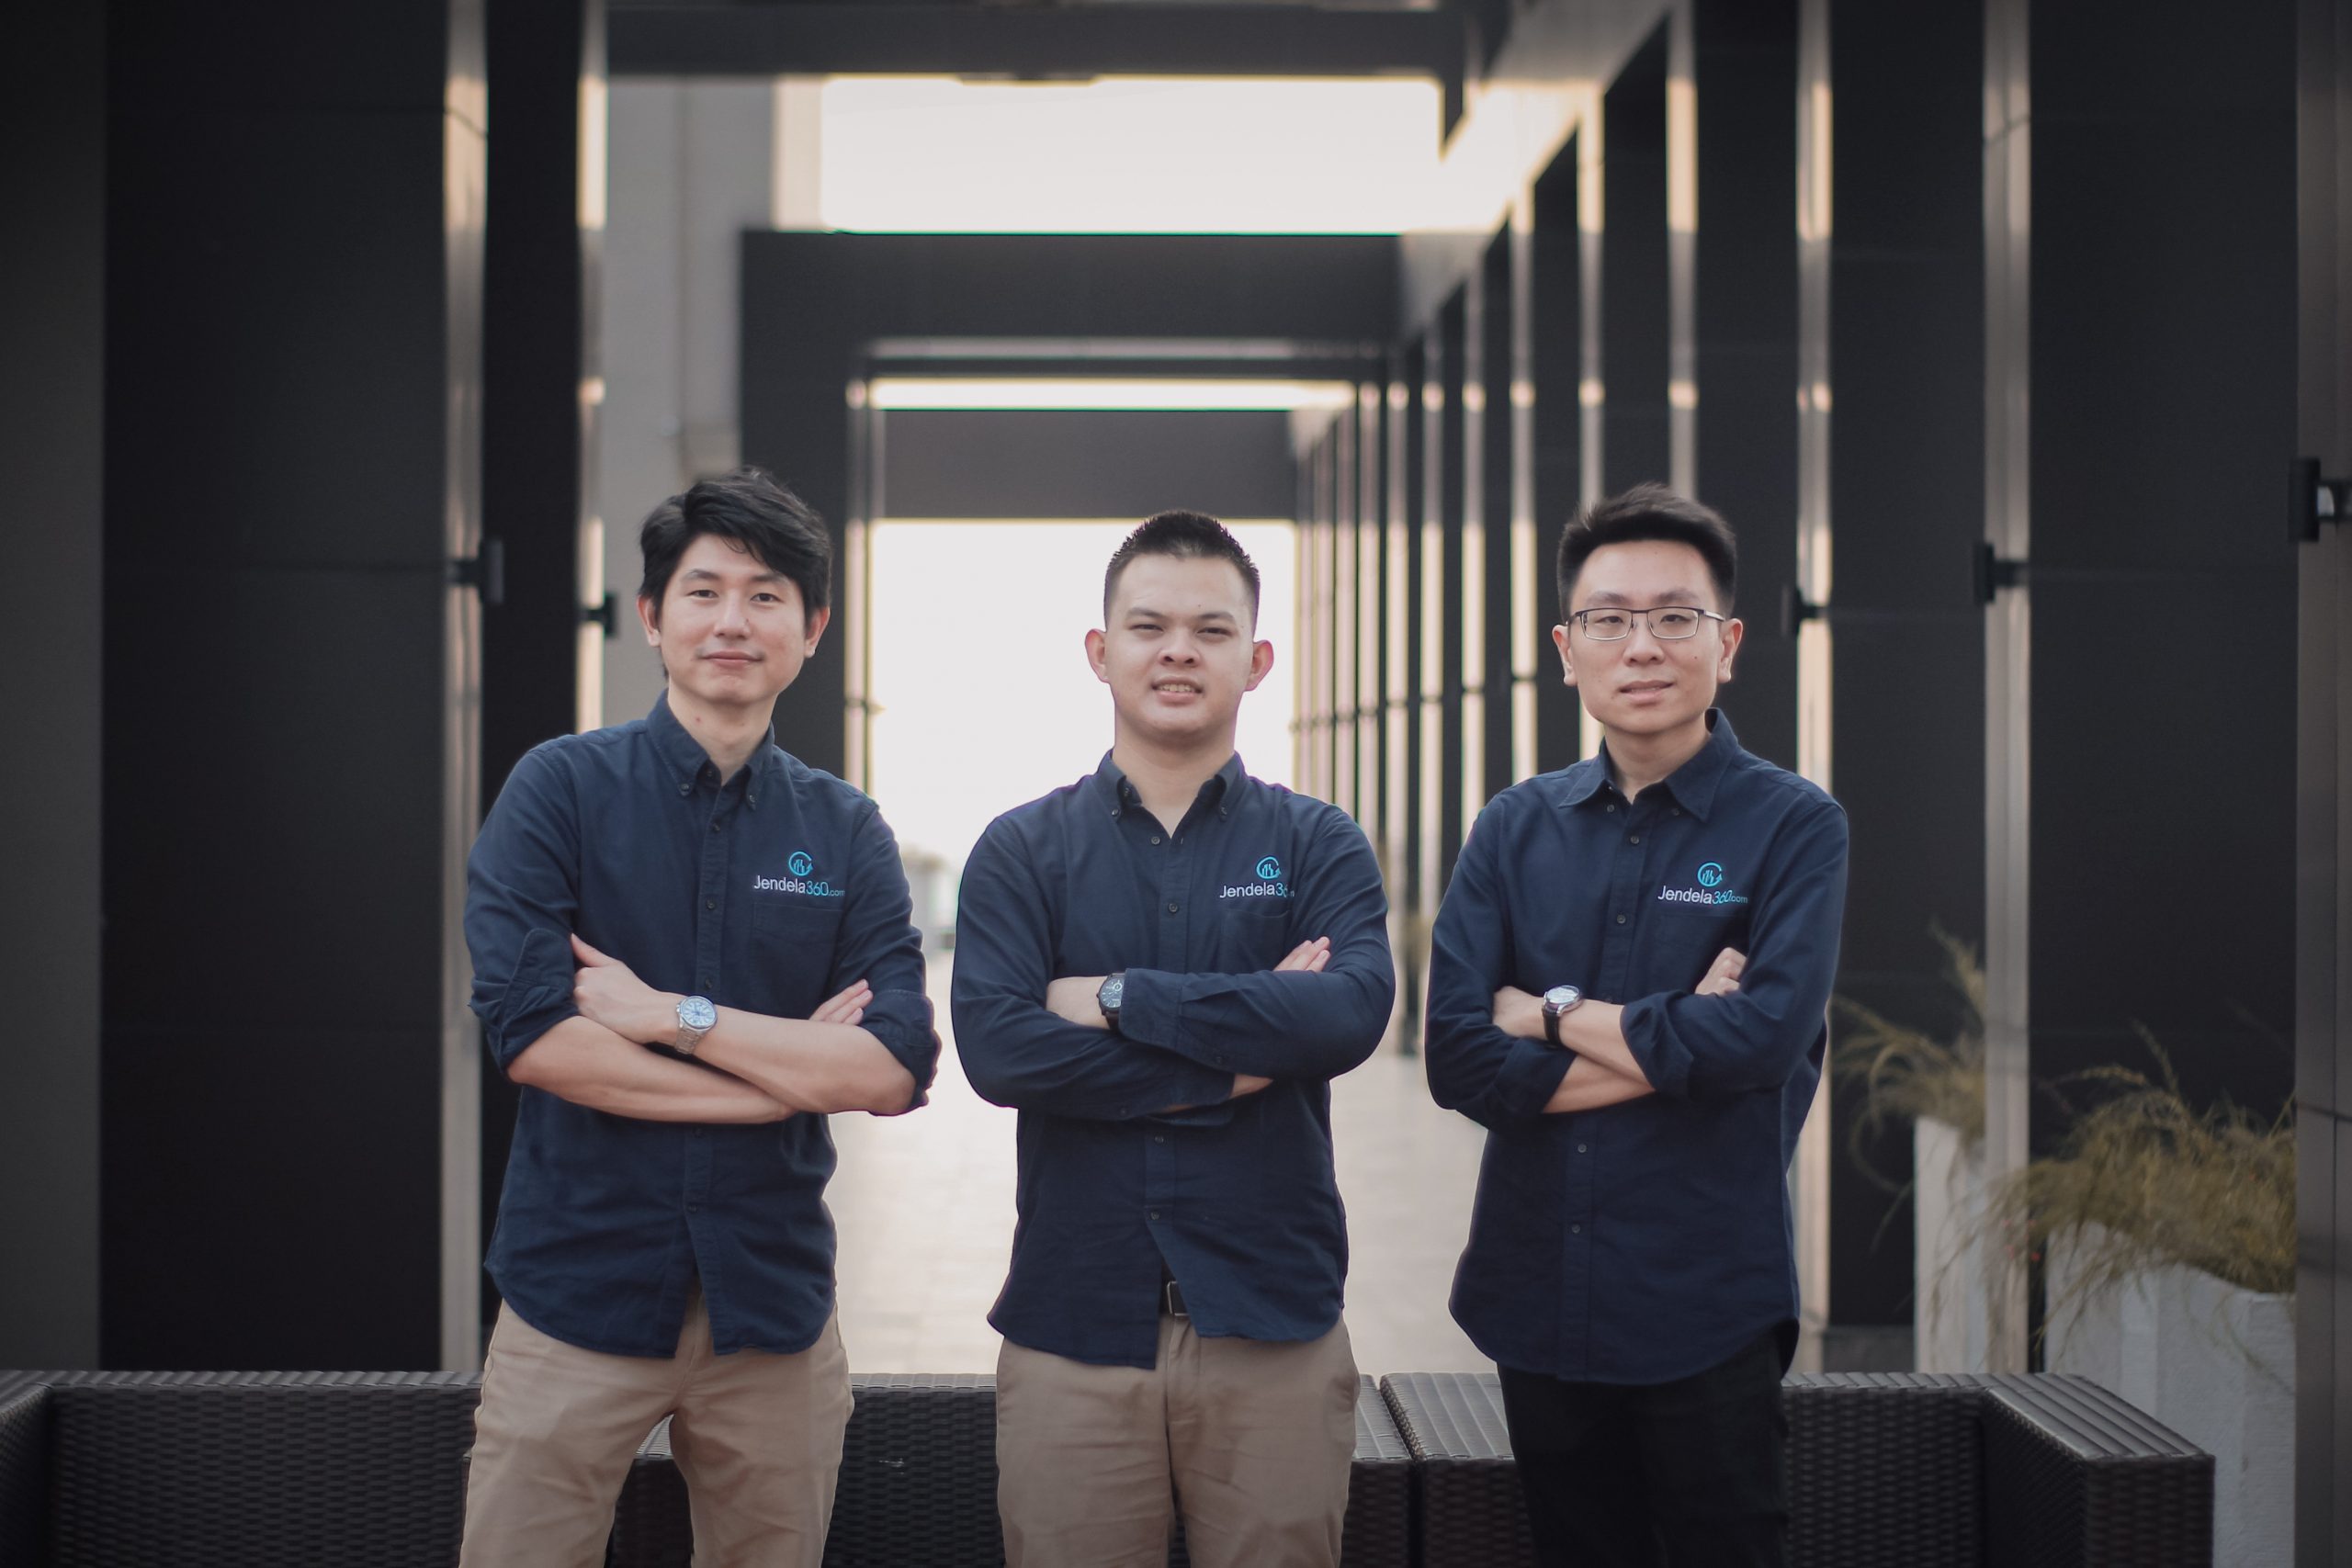 Indonesian proptech Jendela360 bags USD 1 million funding from Beenext, others